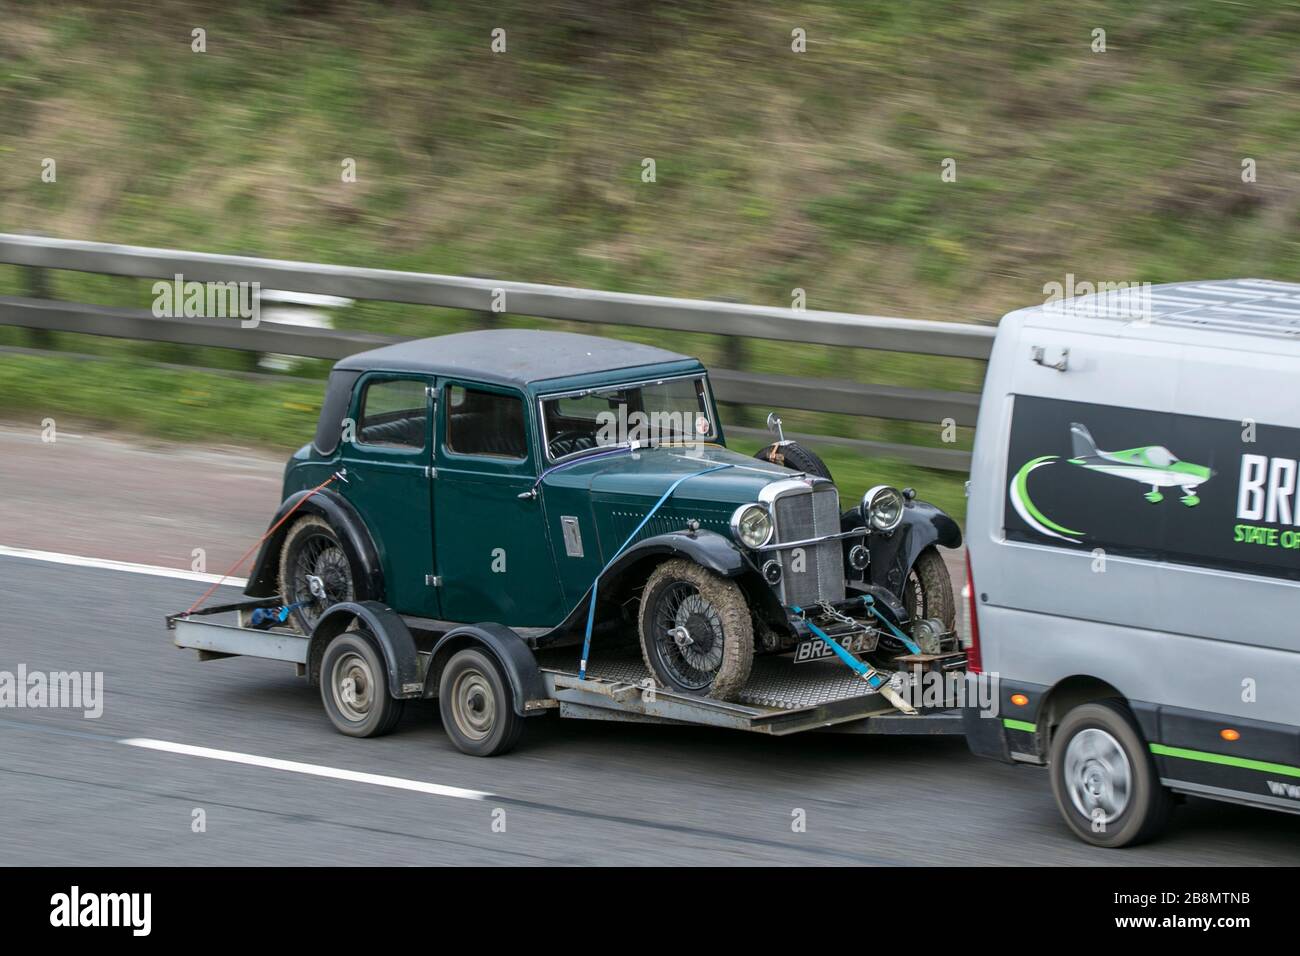 Old Green Alvis sedan classic cars old barn find, heritage restoration project vehicle being towed on the M6 motorway near Preston in Lancashire, UK Stock Photo